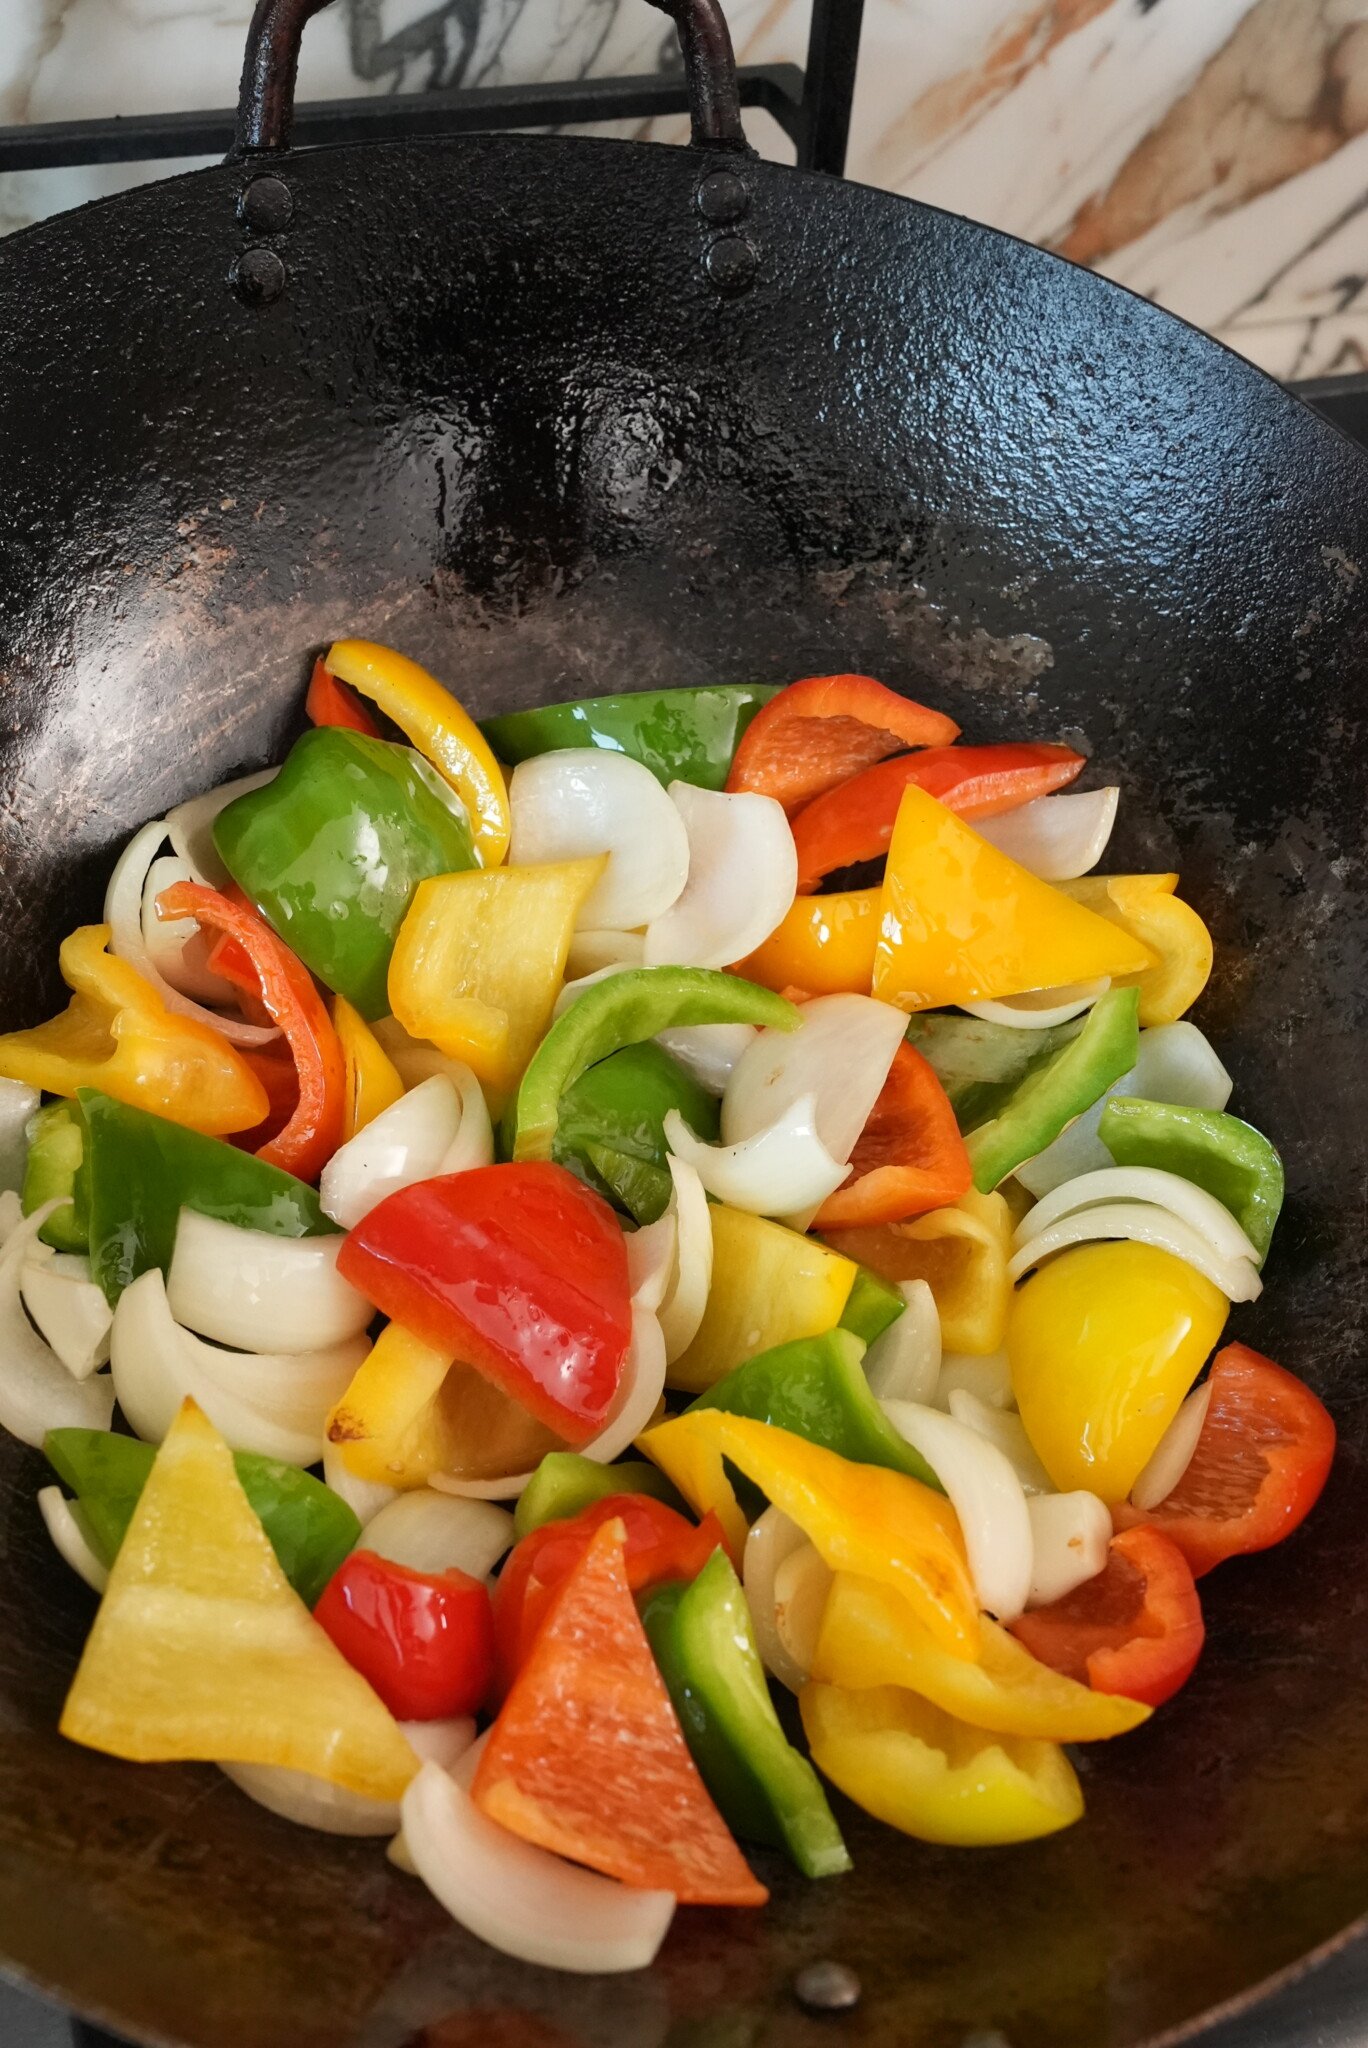 Peppers and onions cooking in a wok.